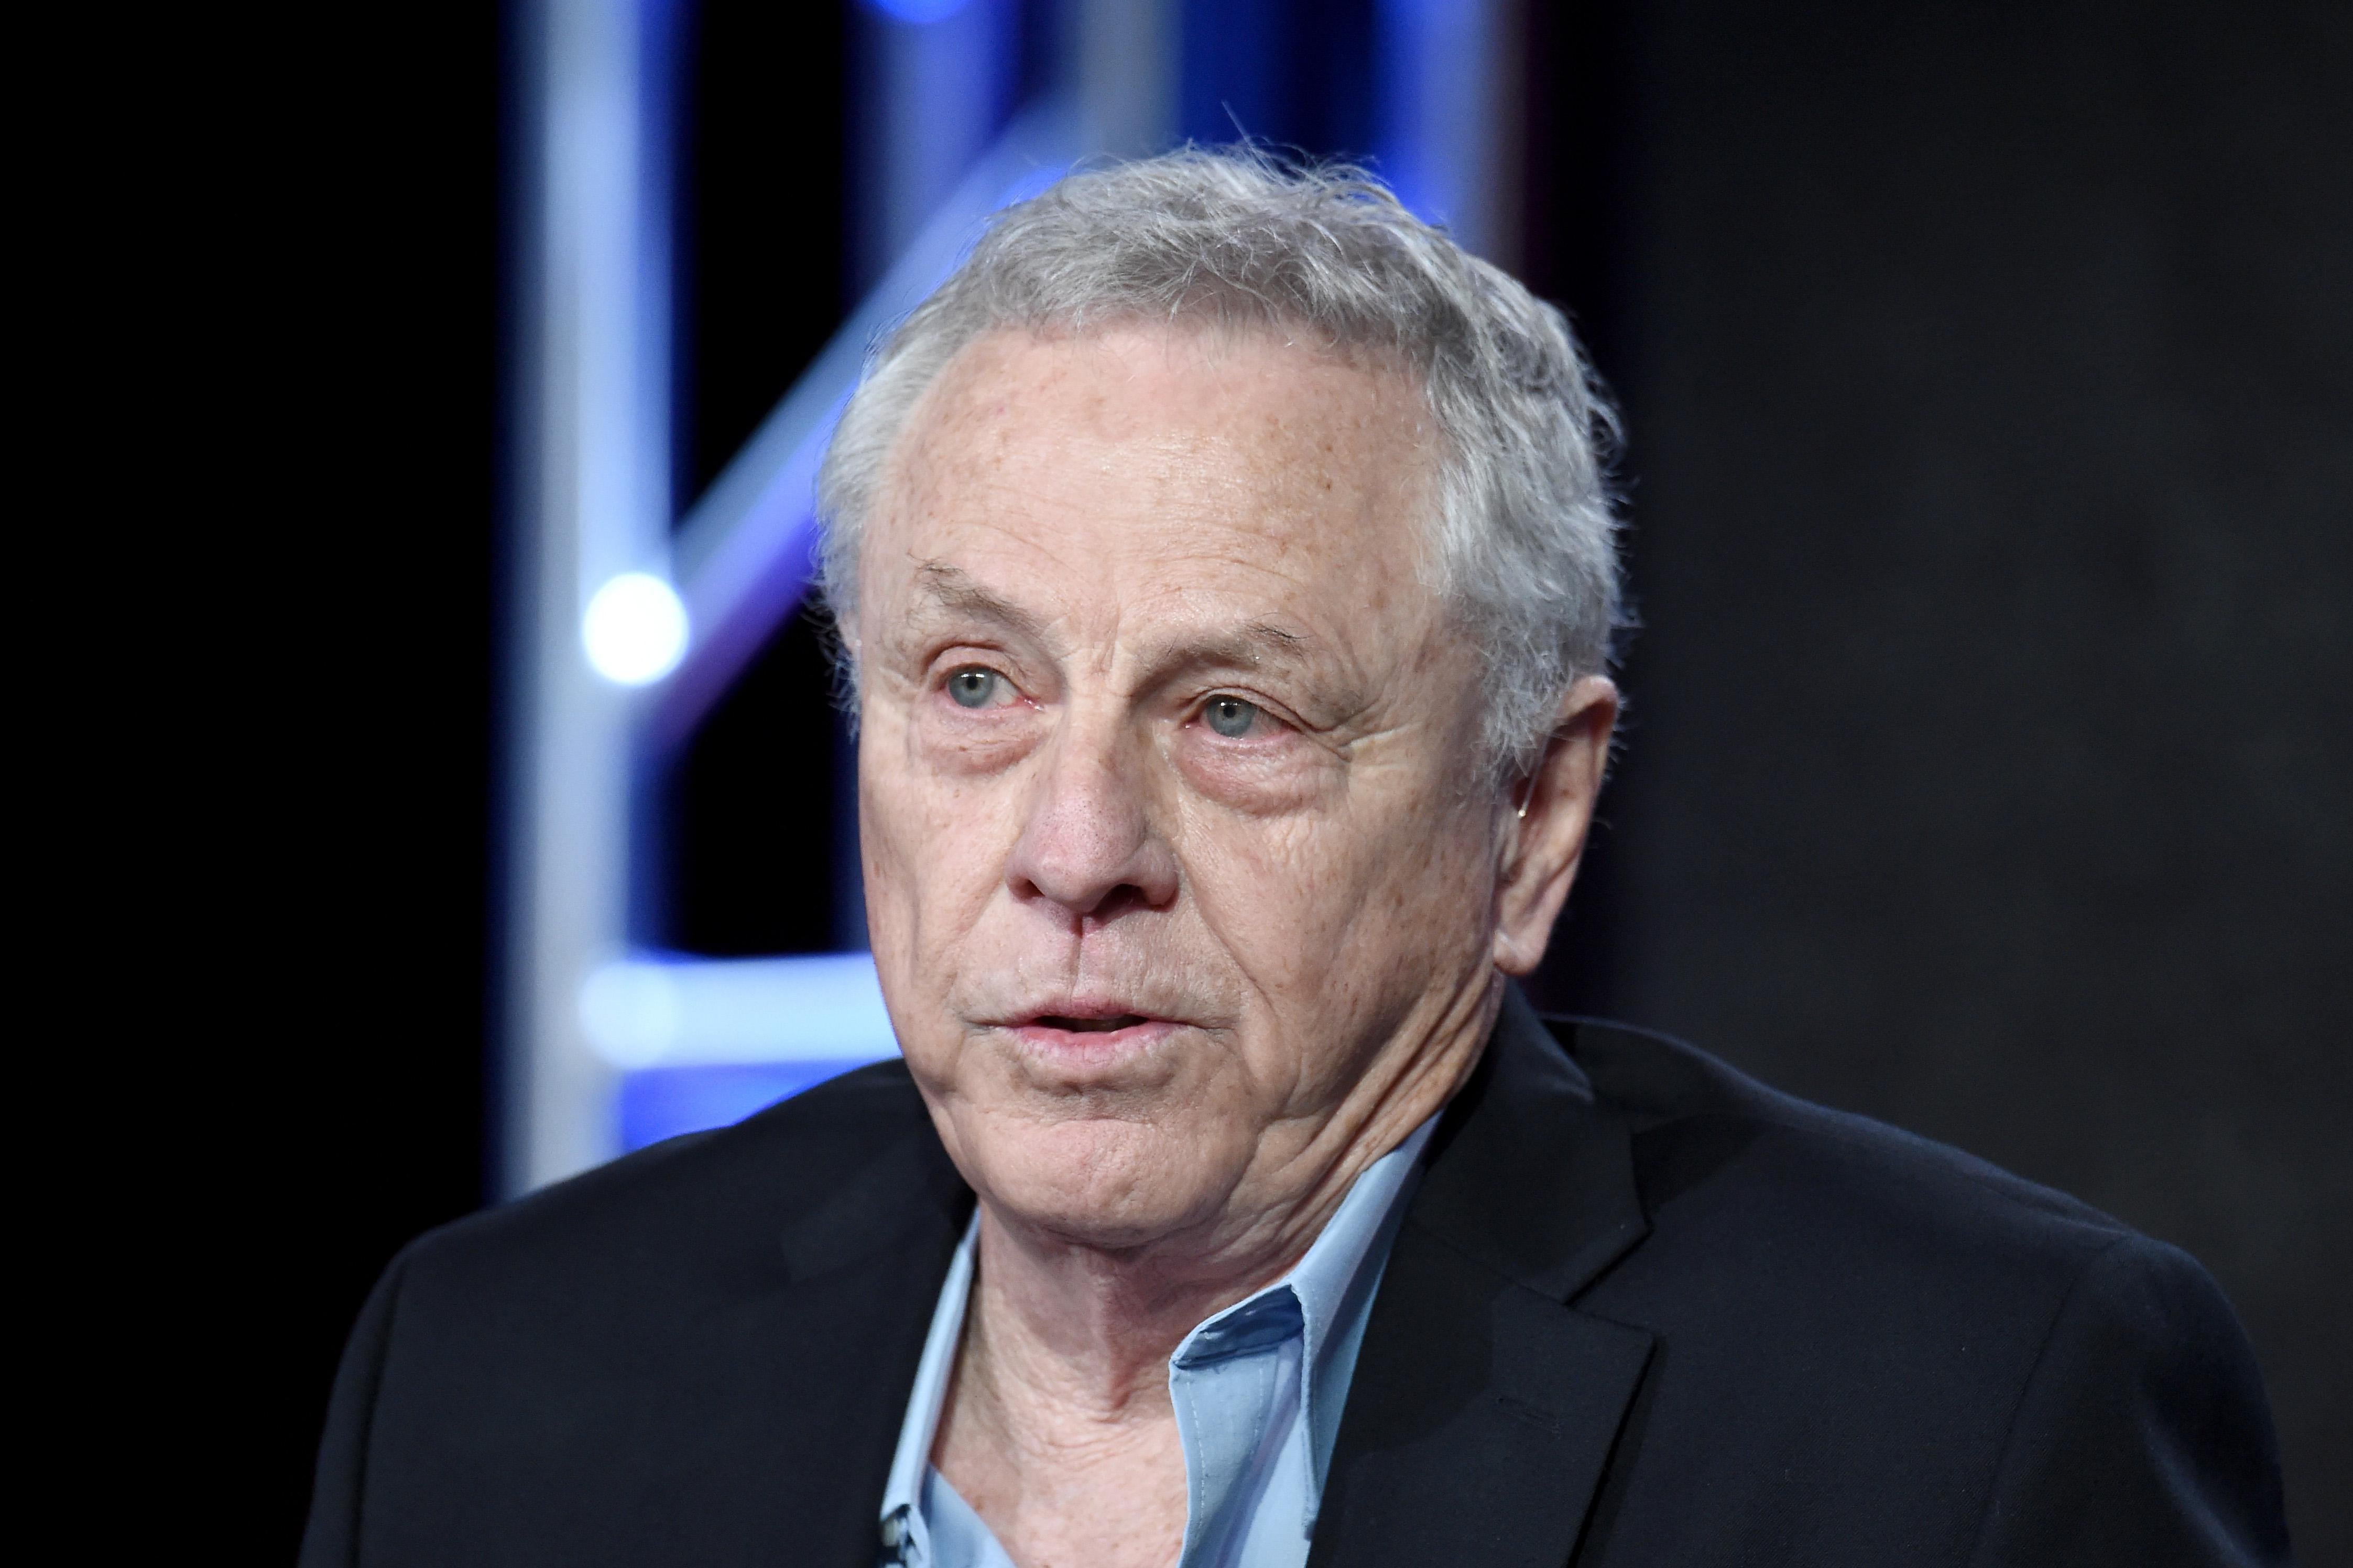 Southern Poverty Law Center co-founder Morris Dees